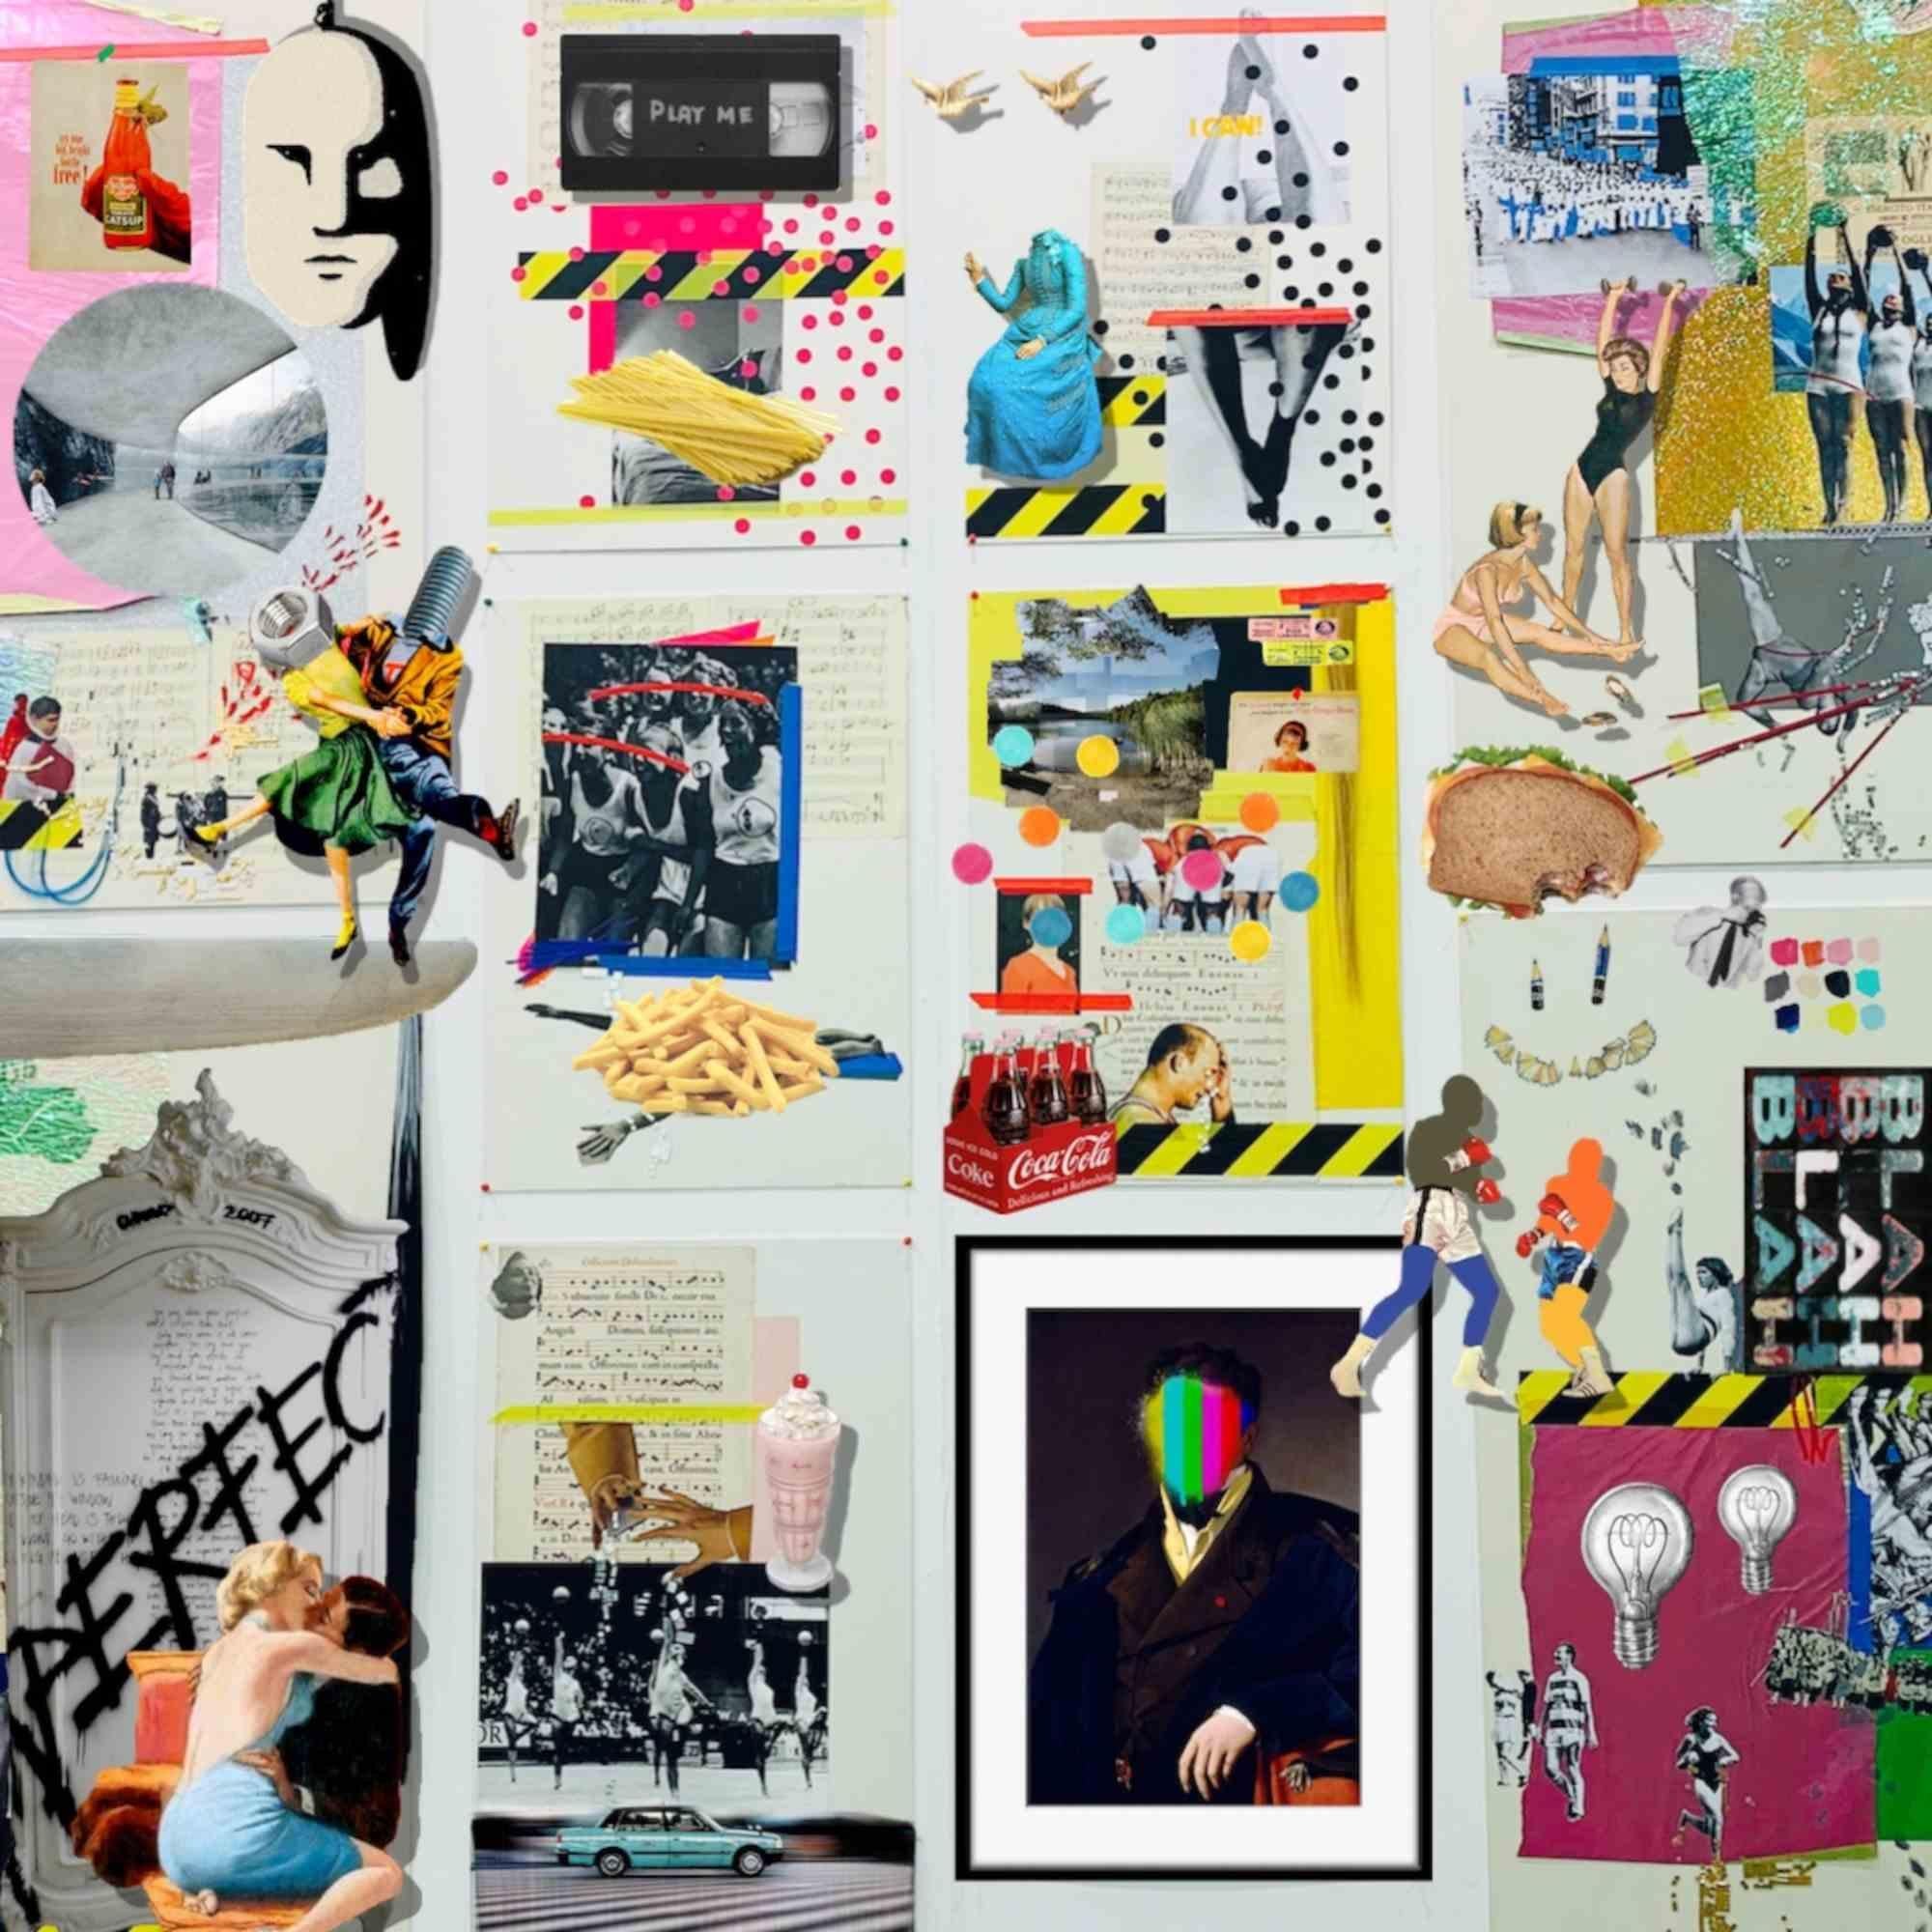 MMXX - is a beautiful print on canvas of a digital collage realized in 2020 by the Italian artist Chiara Santoro

Edition of 10. Hand-signed and numbered.

Modern collage 